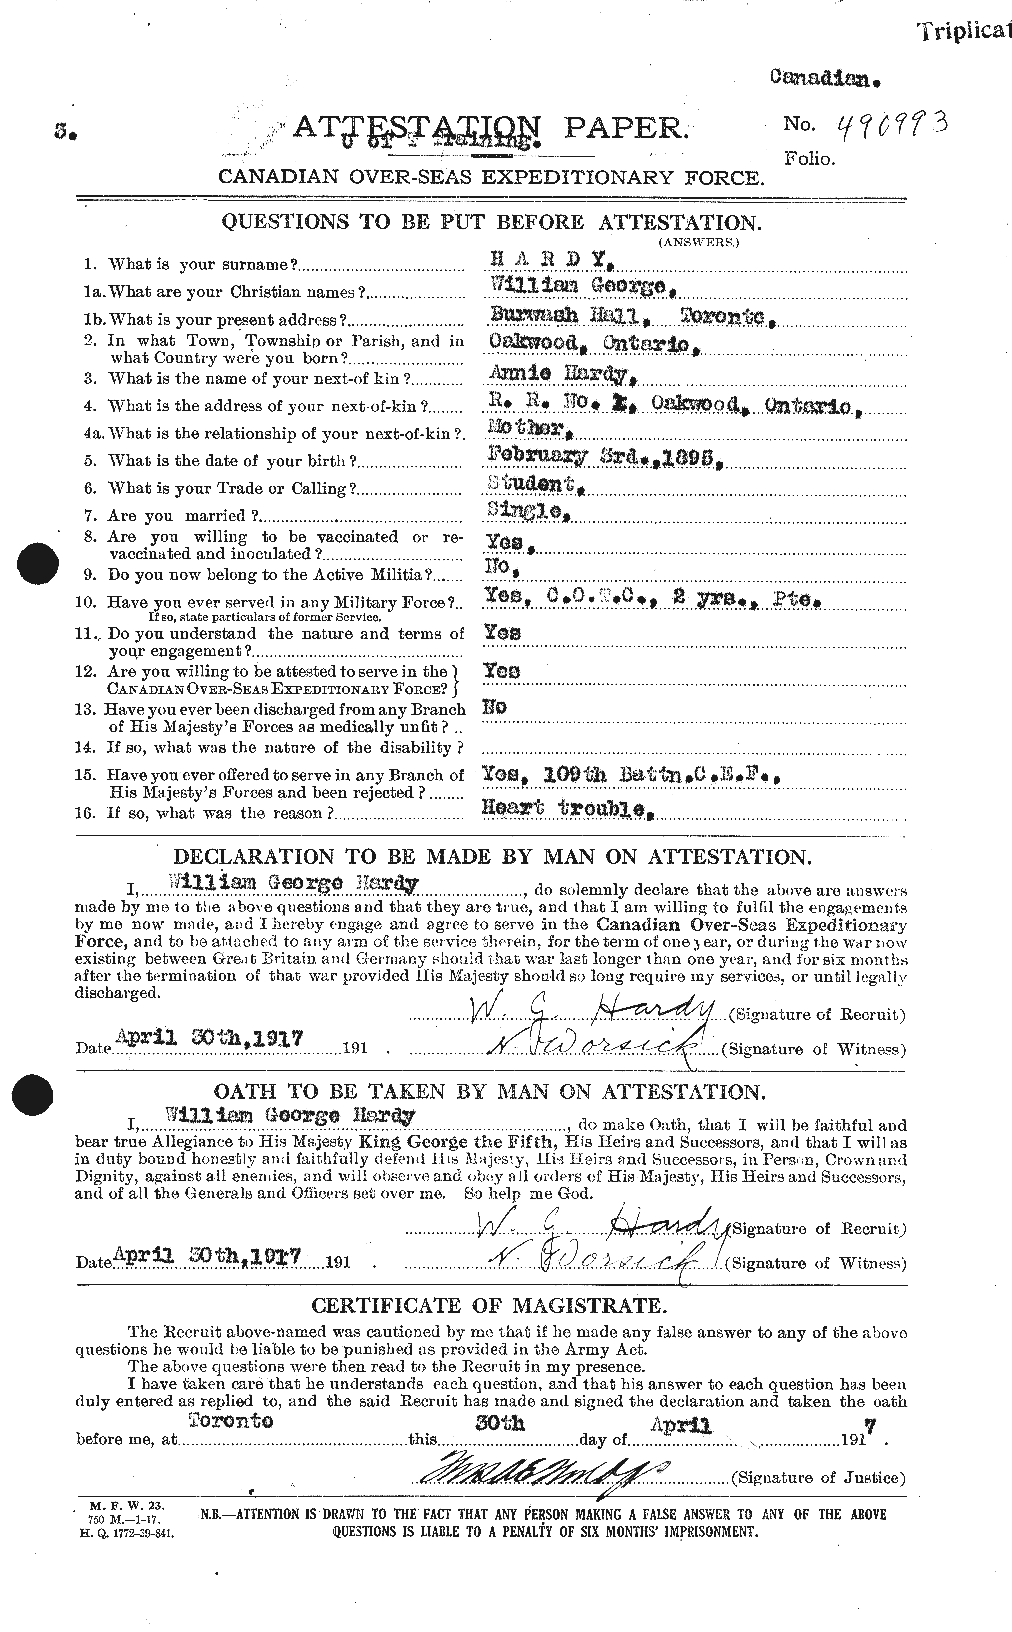 Personnel Records of the First World War - CEF 377870a